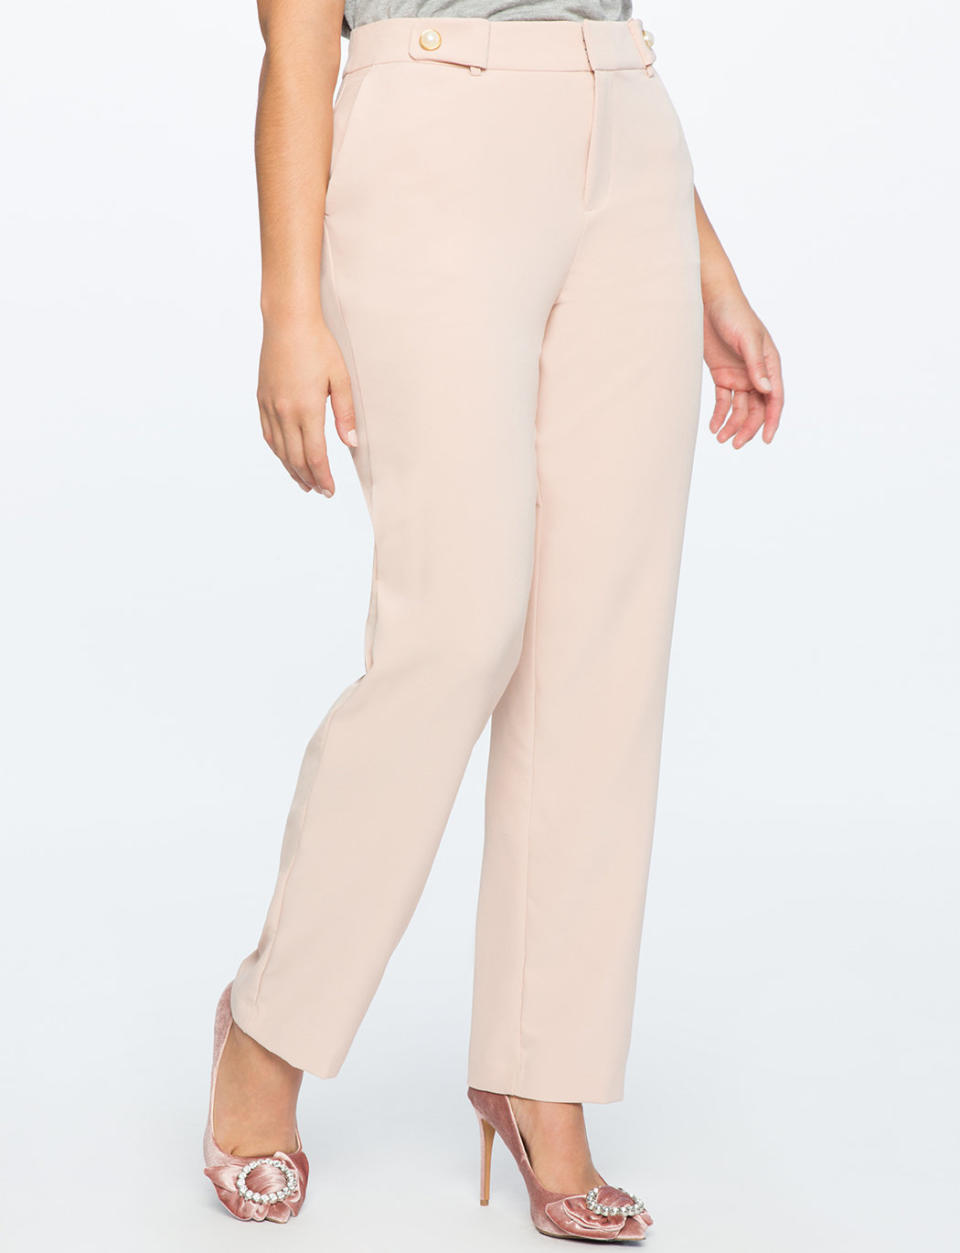 Get it at <a href="http://www.eloquii.com/sam-pant-with-pearl-button-detail/1155495.html?dwvar_1155495_colorCode=2&amp;cgid=pants&amp;start=52" target="_blank">Eloquii</a>, $90.